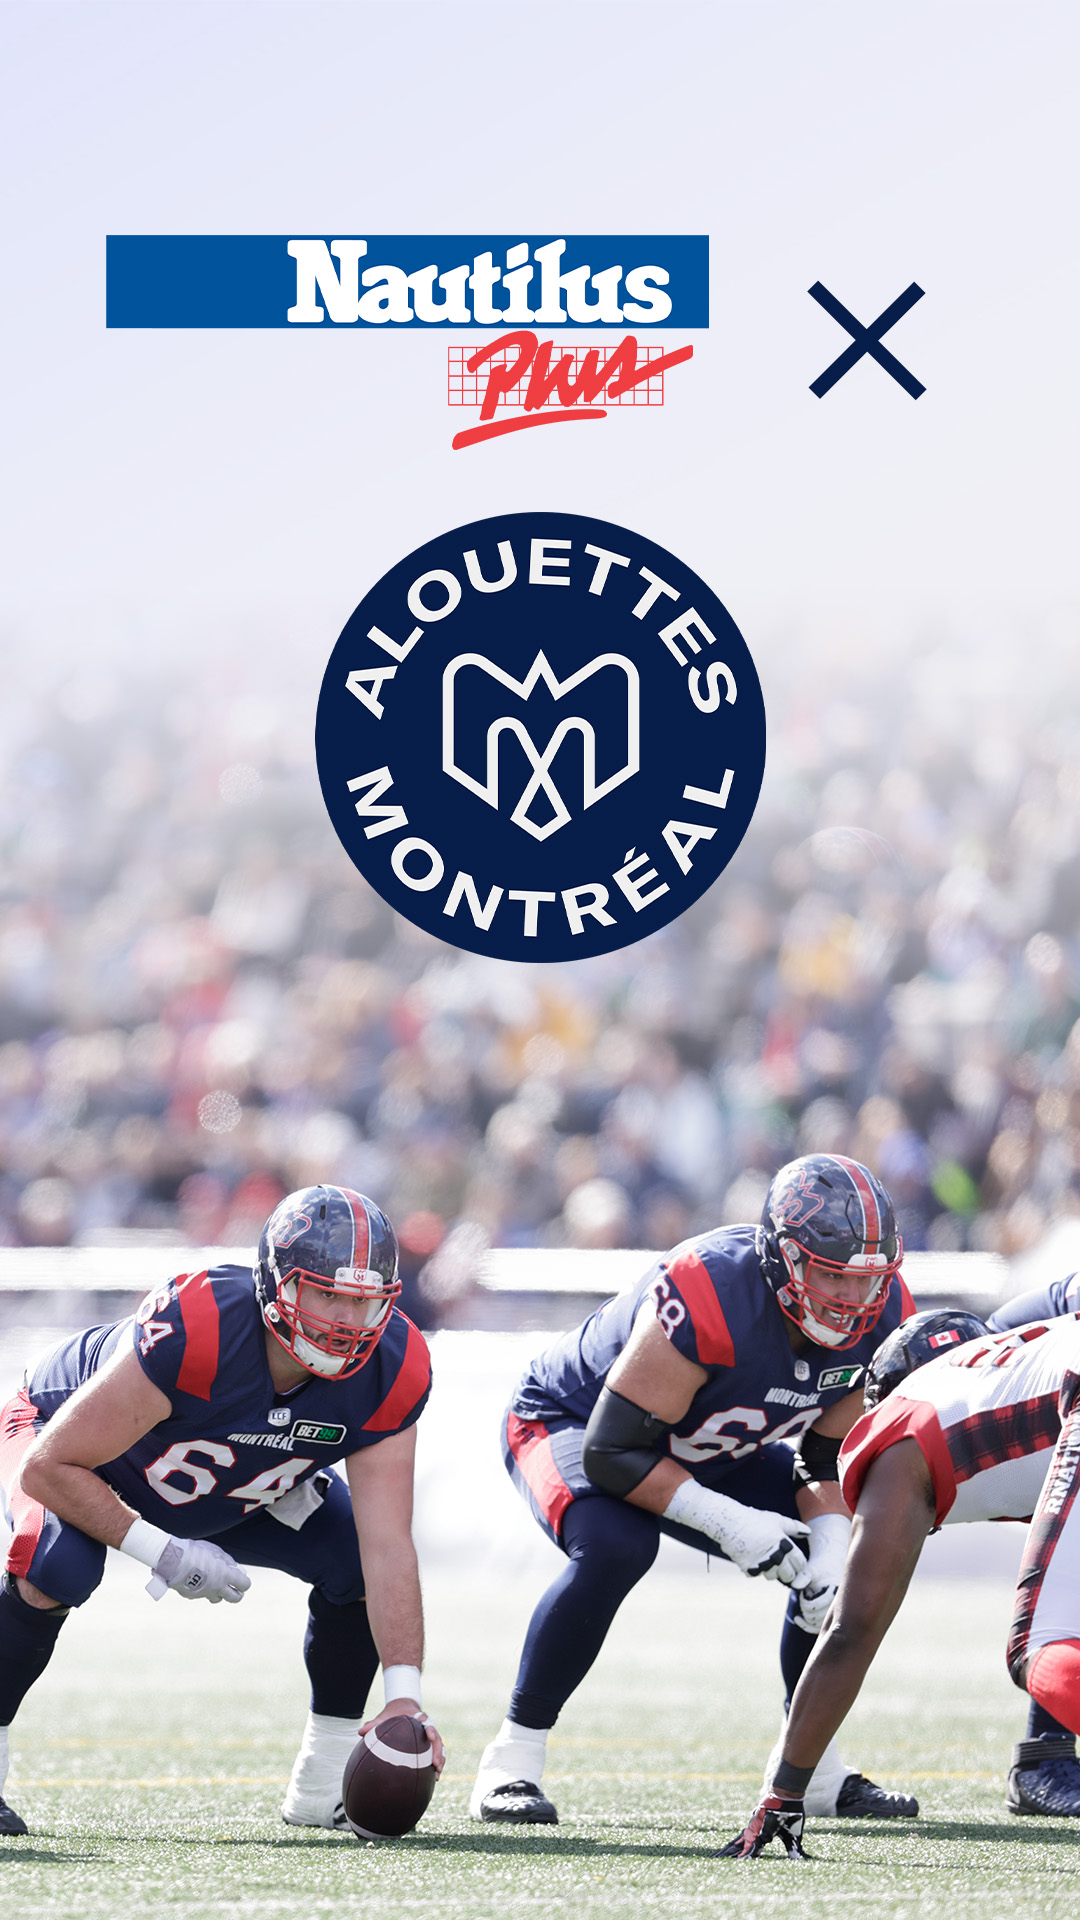 Nautilus Plus: Official Partner of the Montreal Alouettes